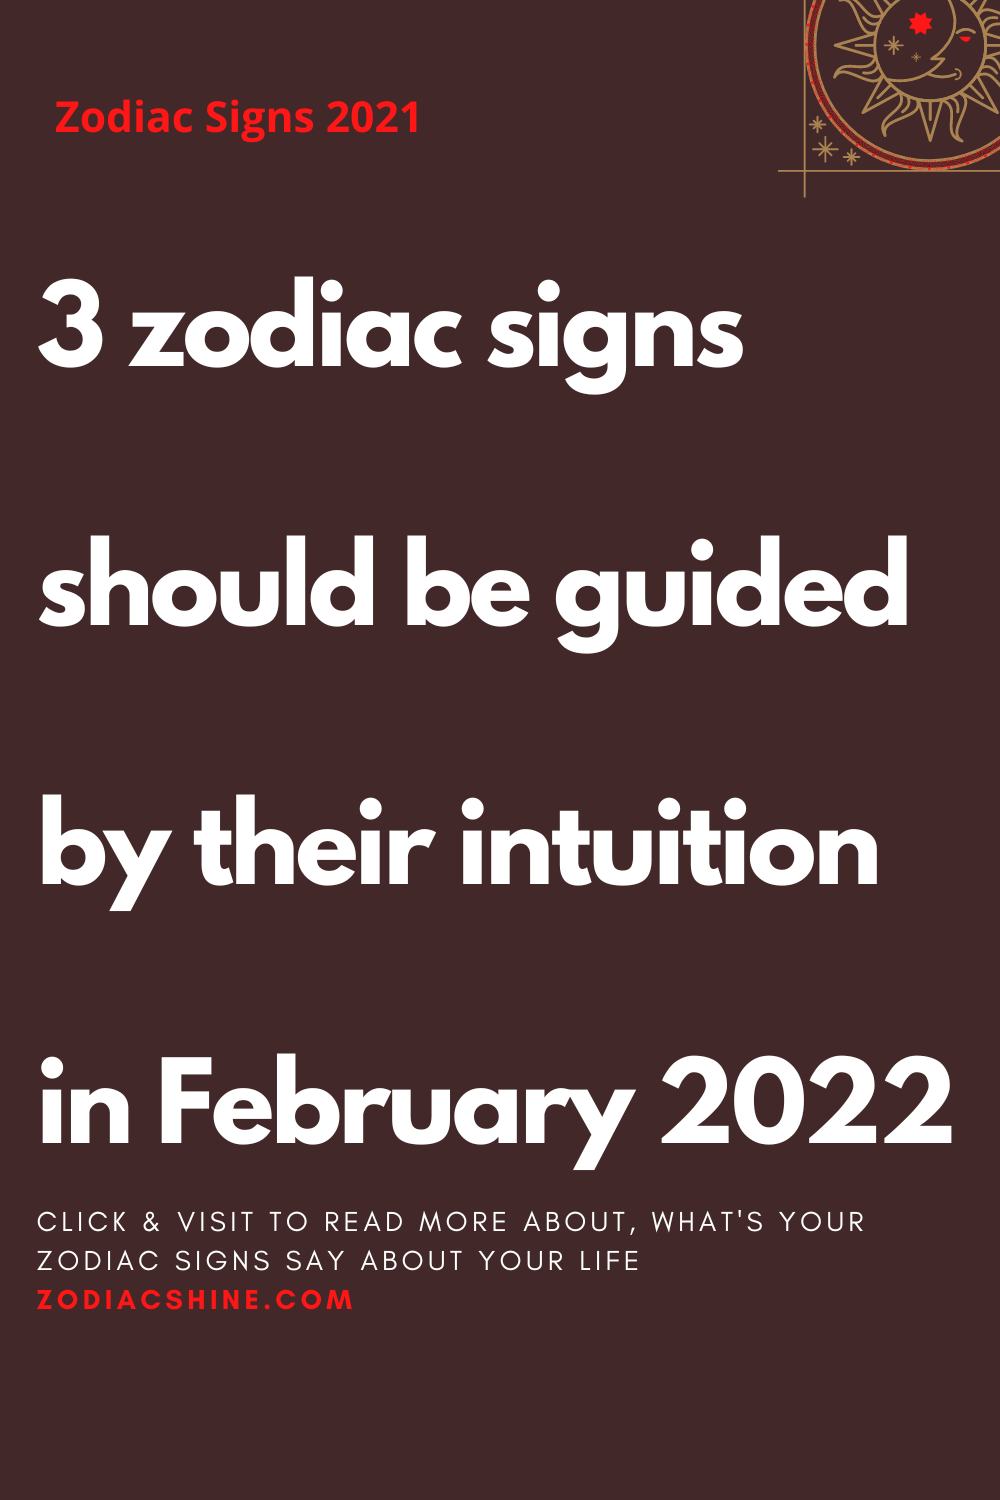 3 zodiac signs should be guided by their intuition in February 2022